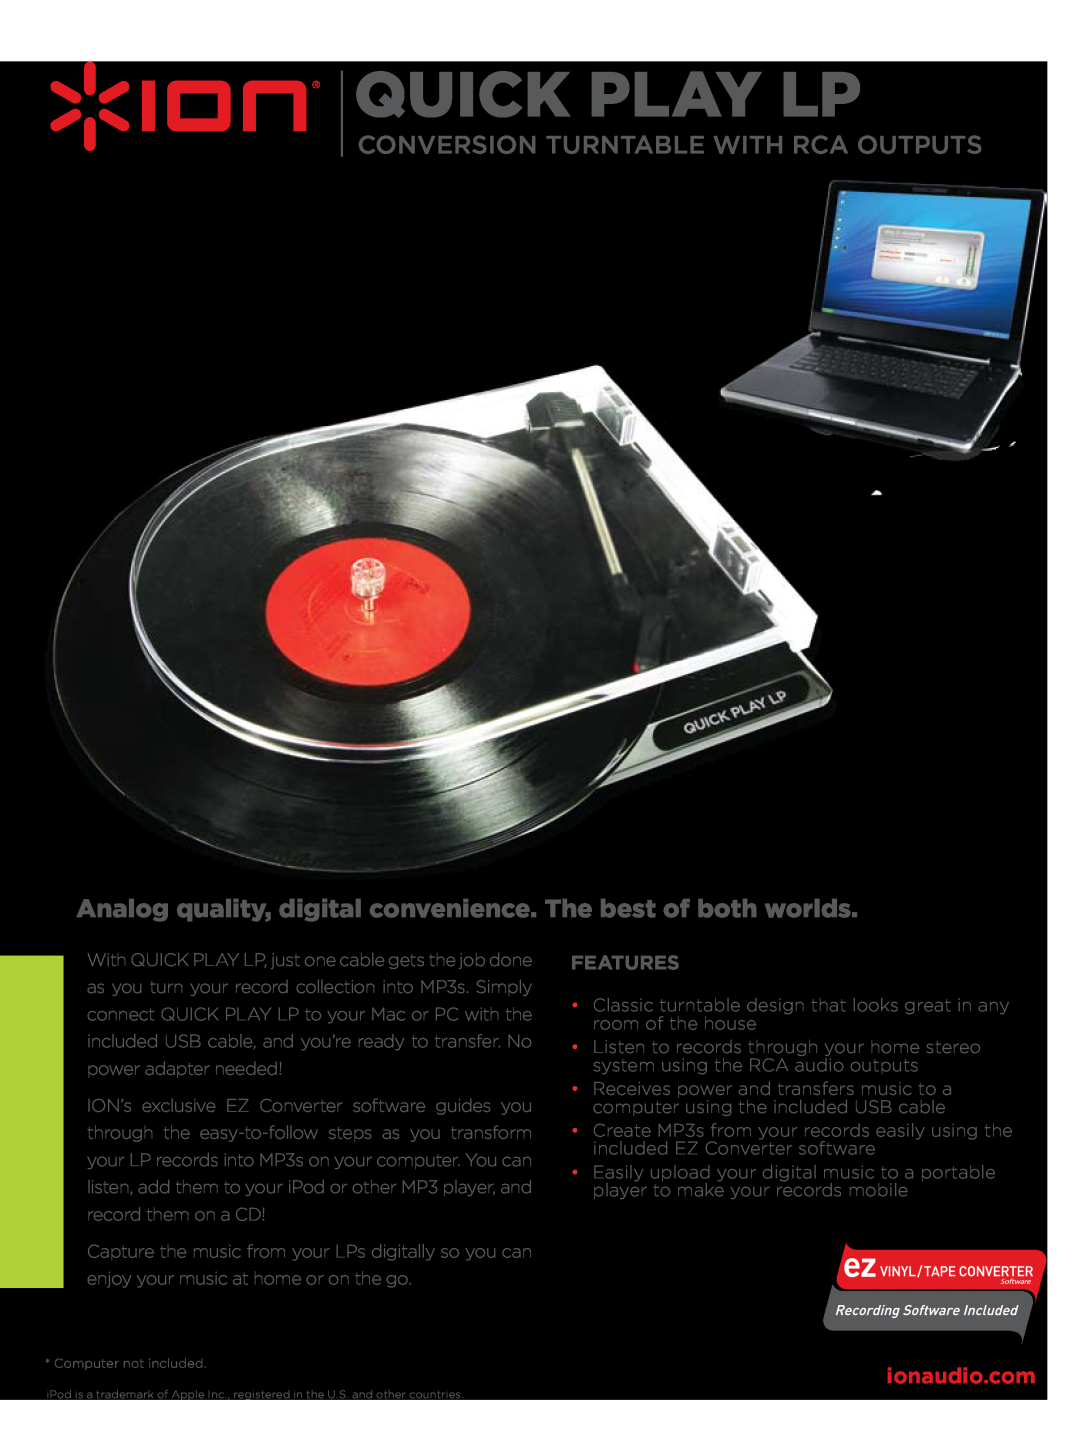 ION QUICK PLAY LP specifications Quick Play Lp, Conversion Turntable with RCA Outputs, Features 